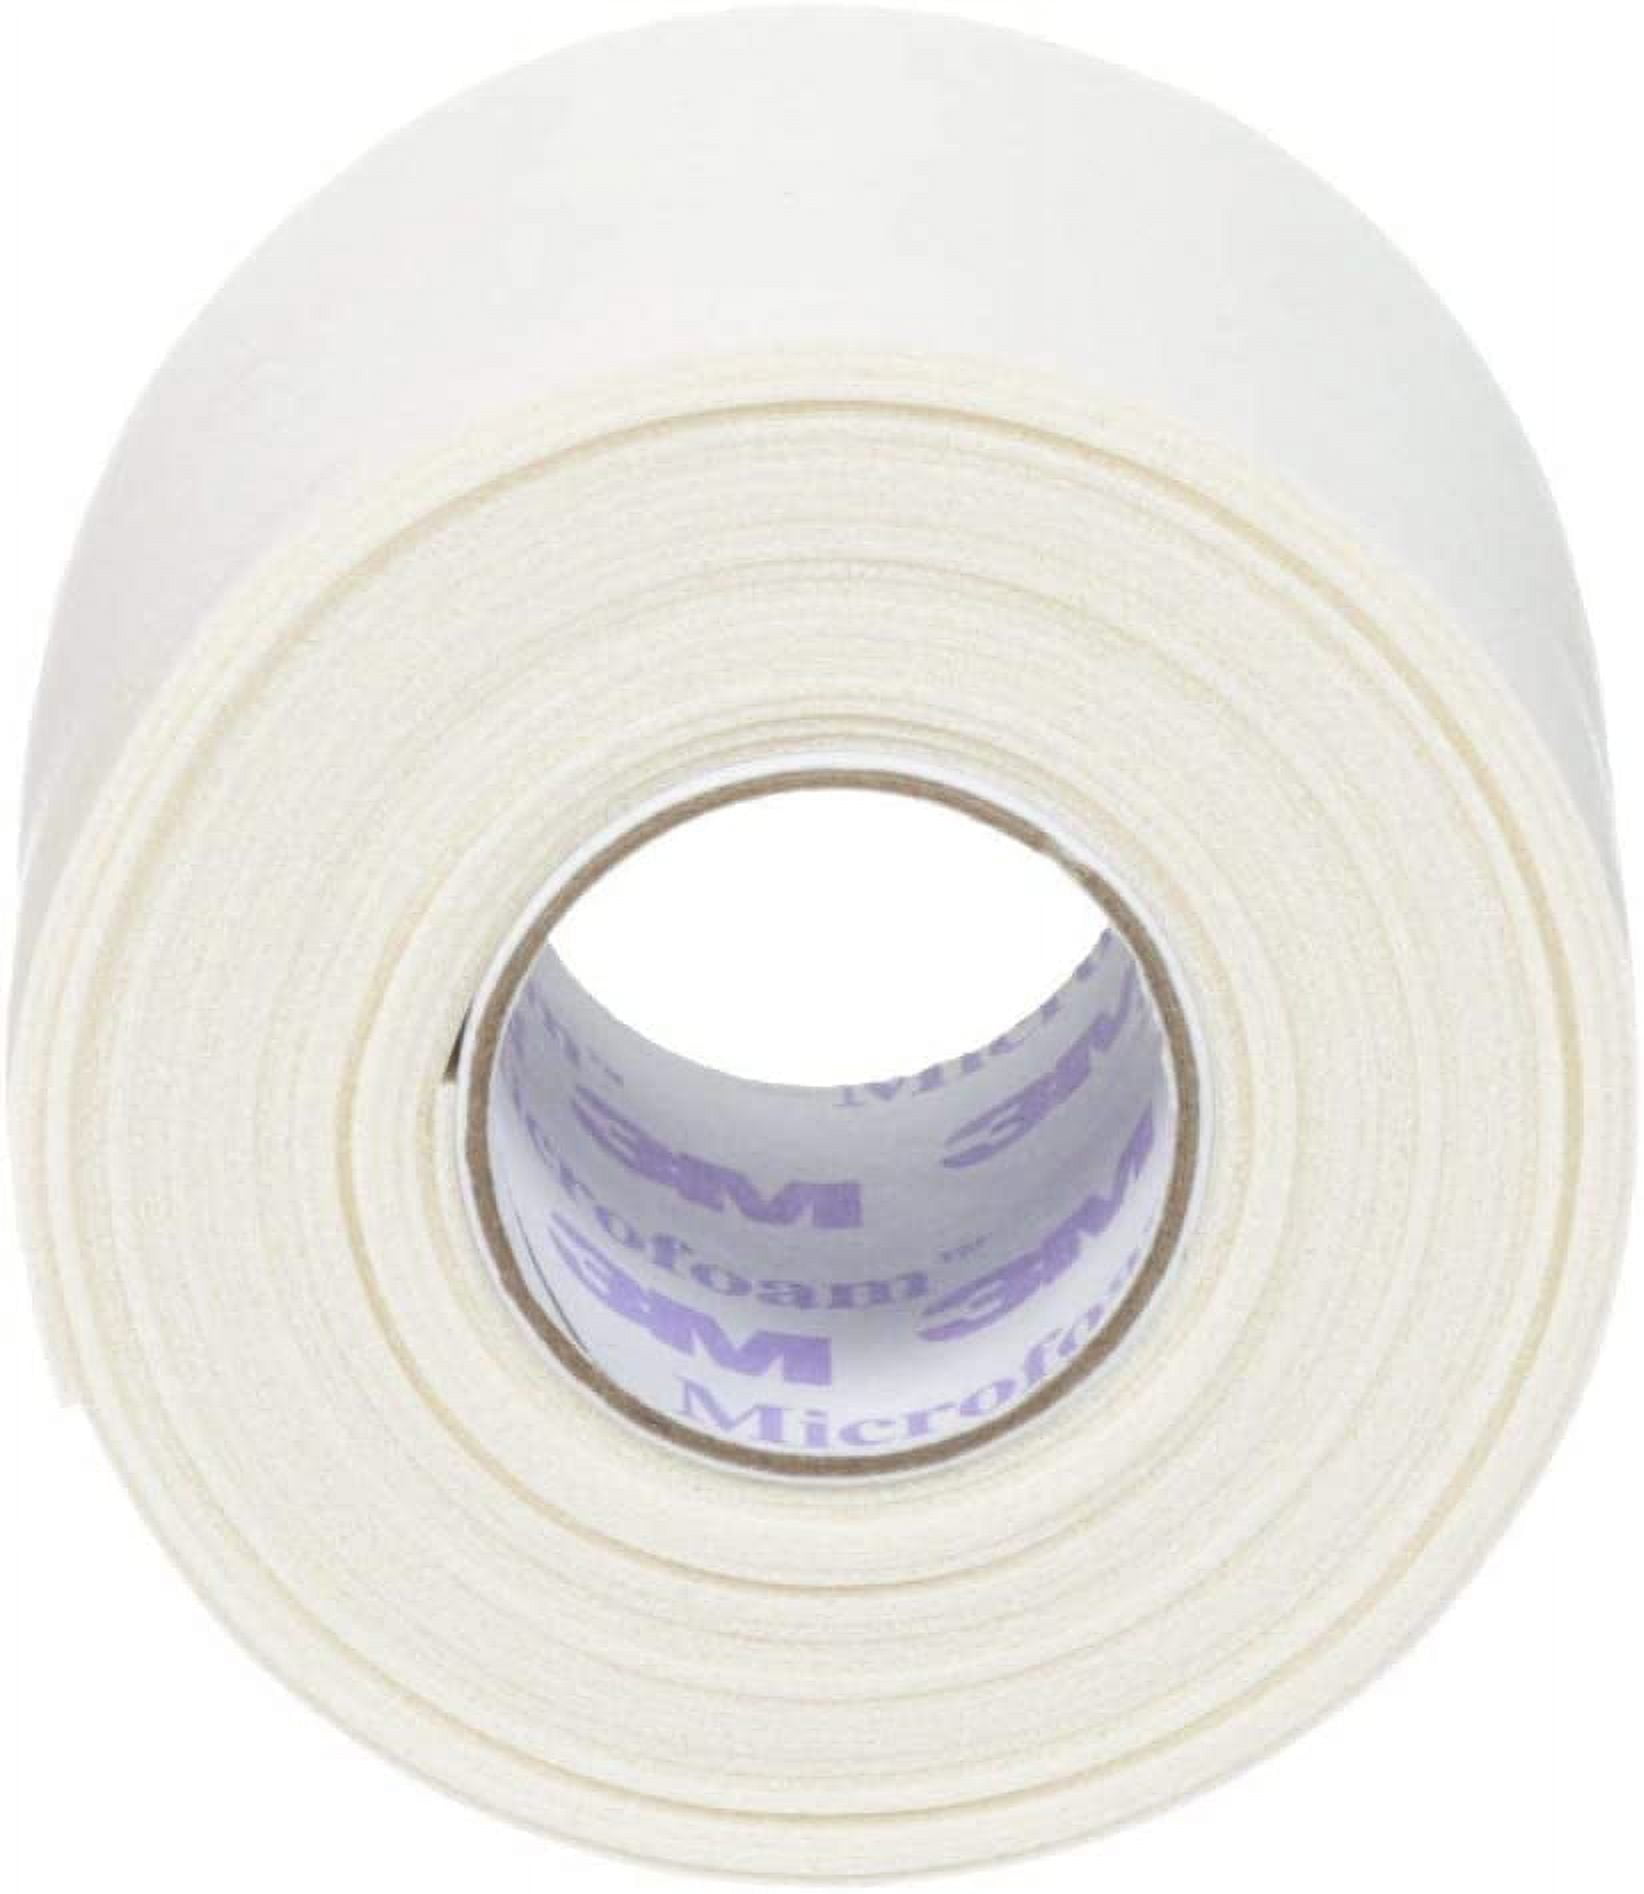 3M Medipore Soft Cloth Surgical Tape - 2 x 10 yds 2862 Ea